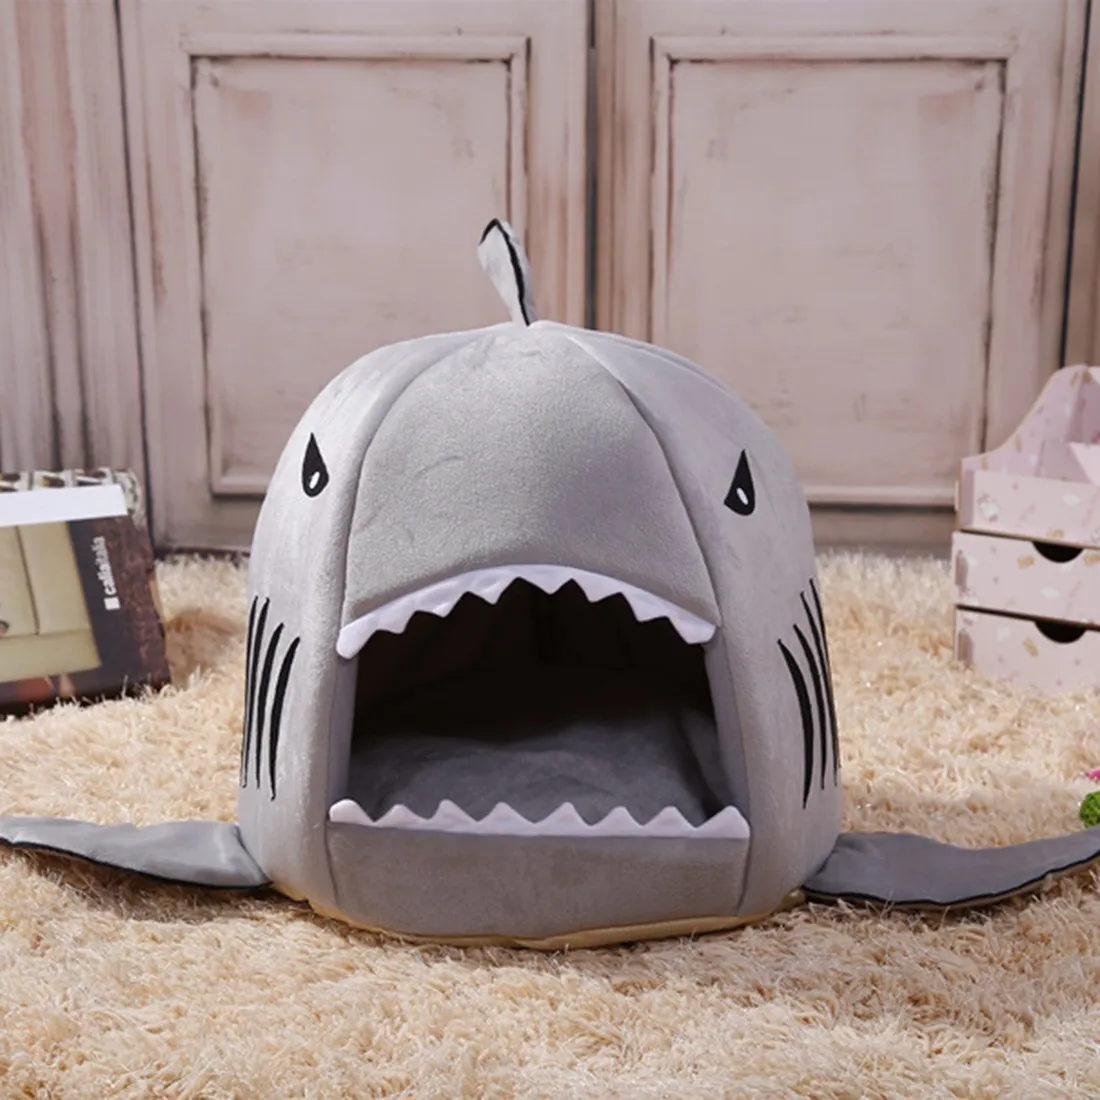 Soft Shark Pet Dog Cat Kennel House Tente Doggy Winter Coussin chaud Panier Animal Bed Cave Fournitures pour animaux de compagnie LJ201203